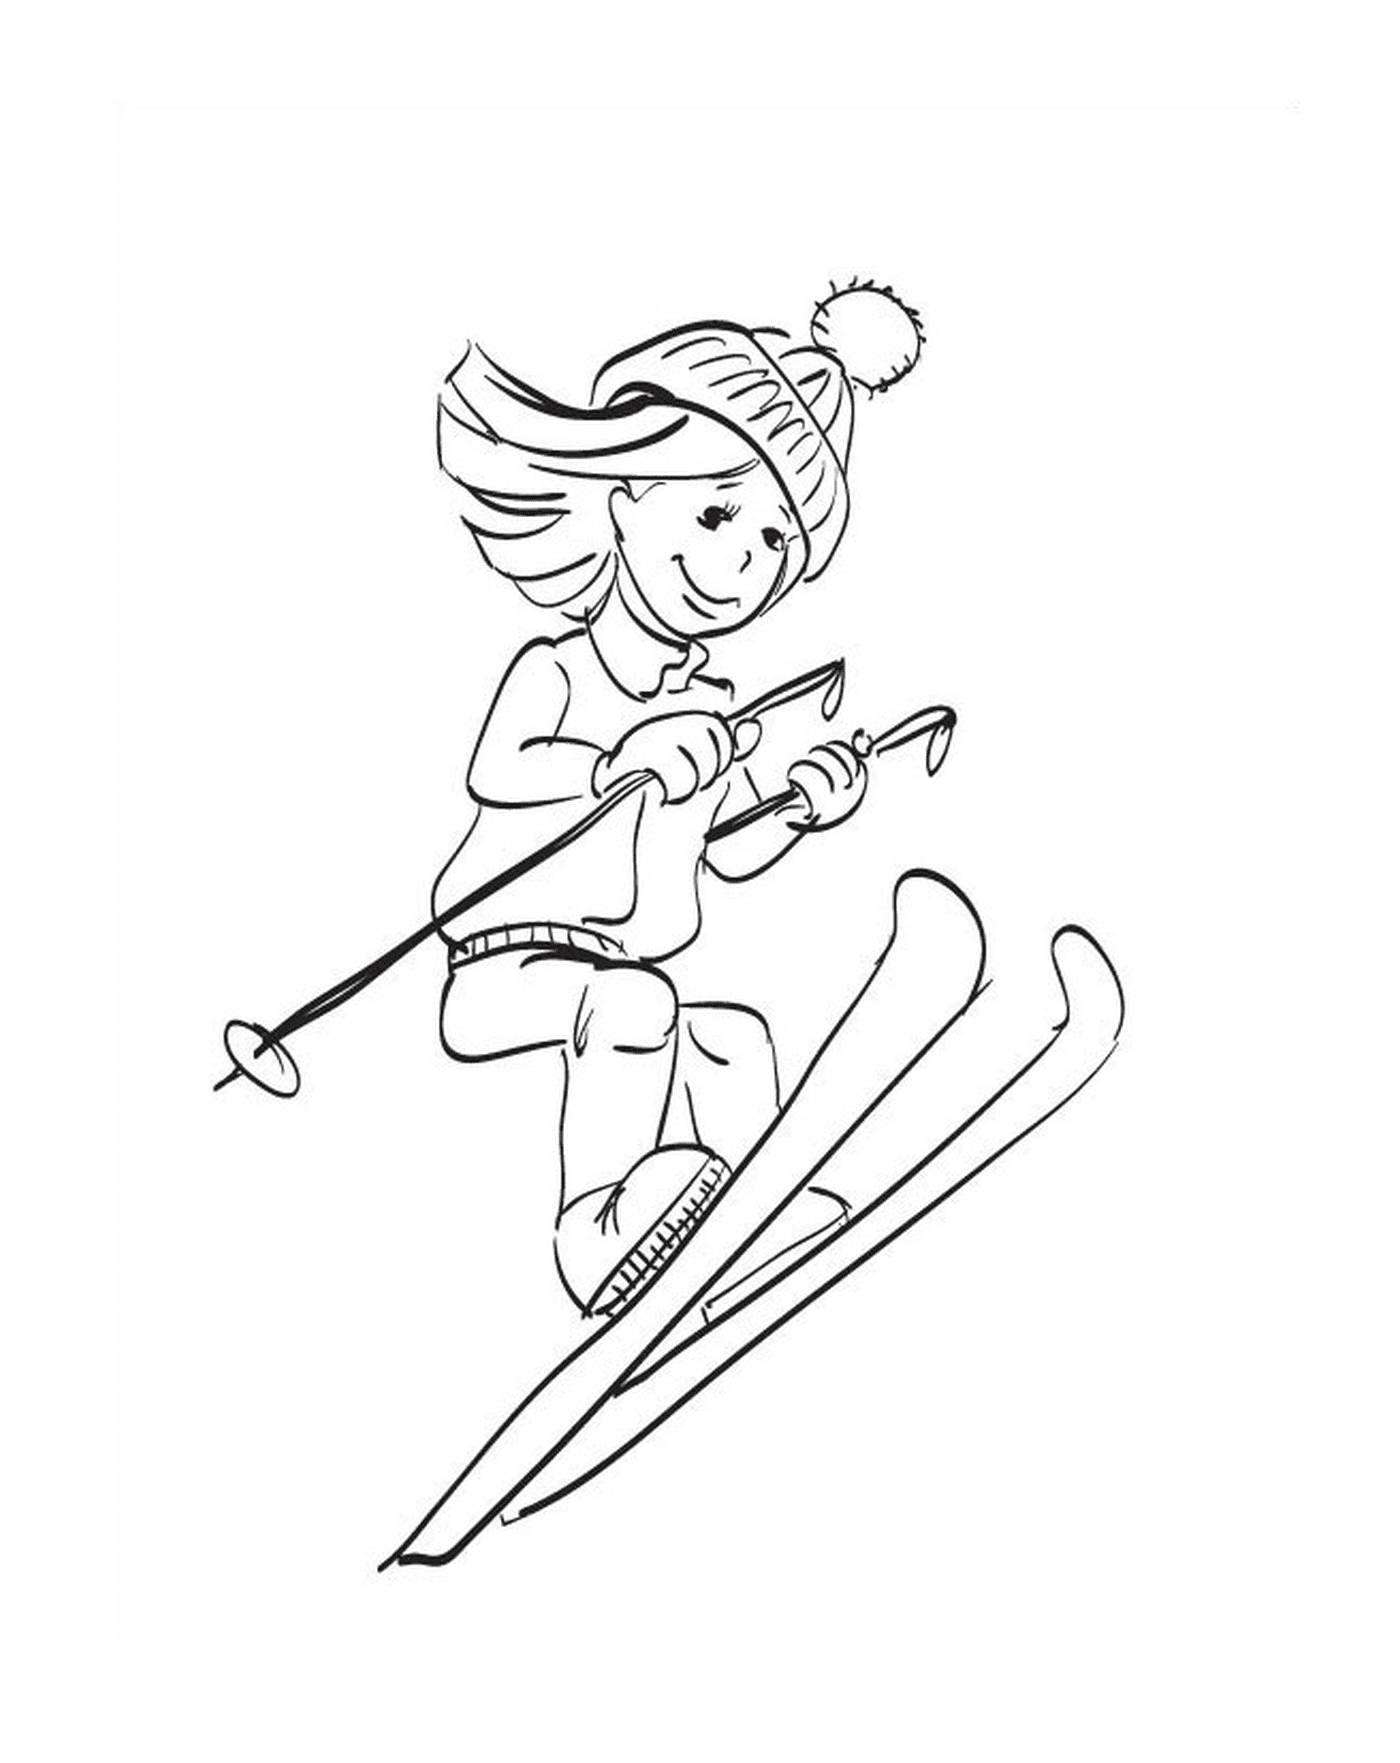  Winter sport, skiing, girl going down a slope 